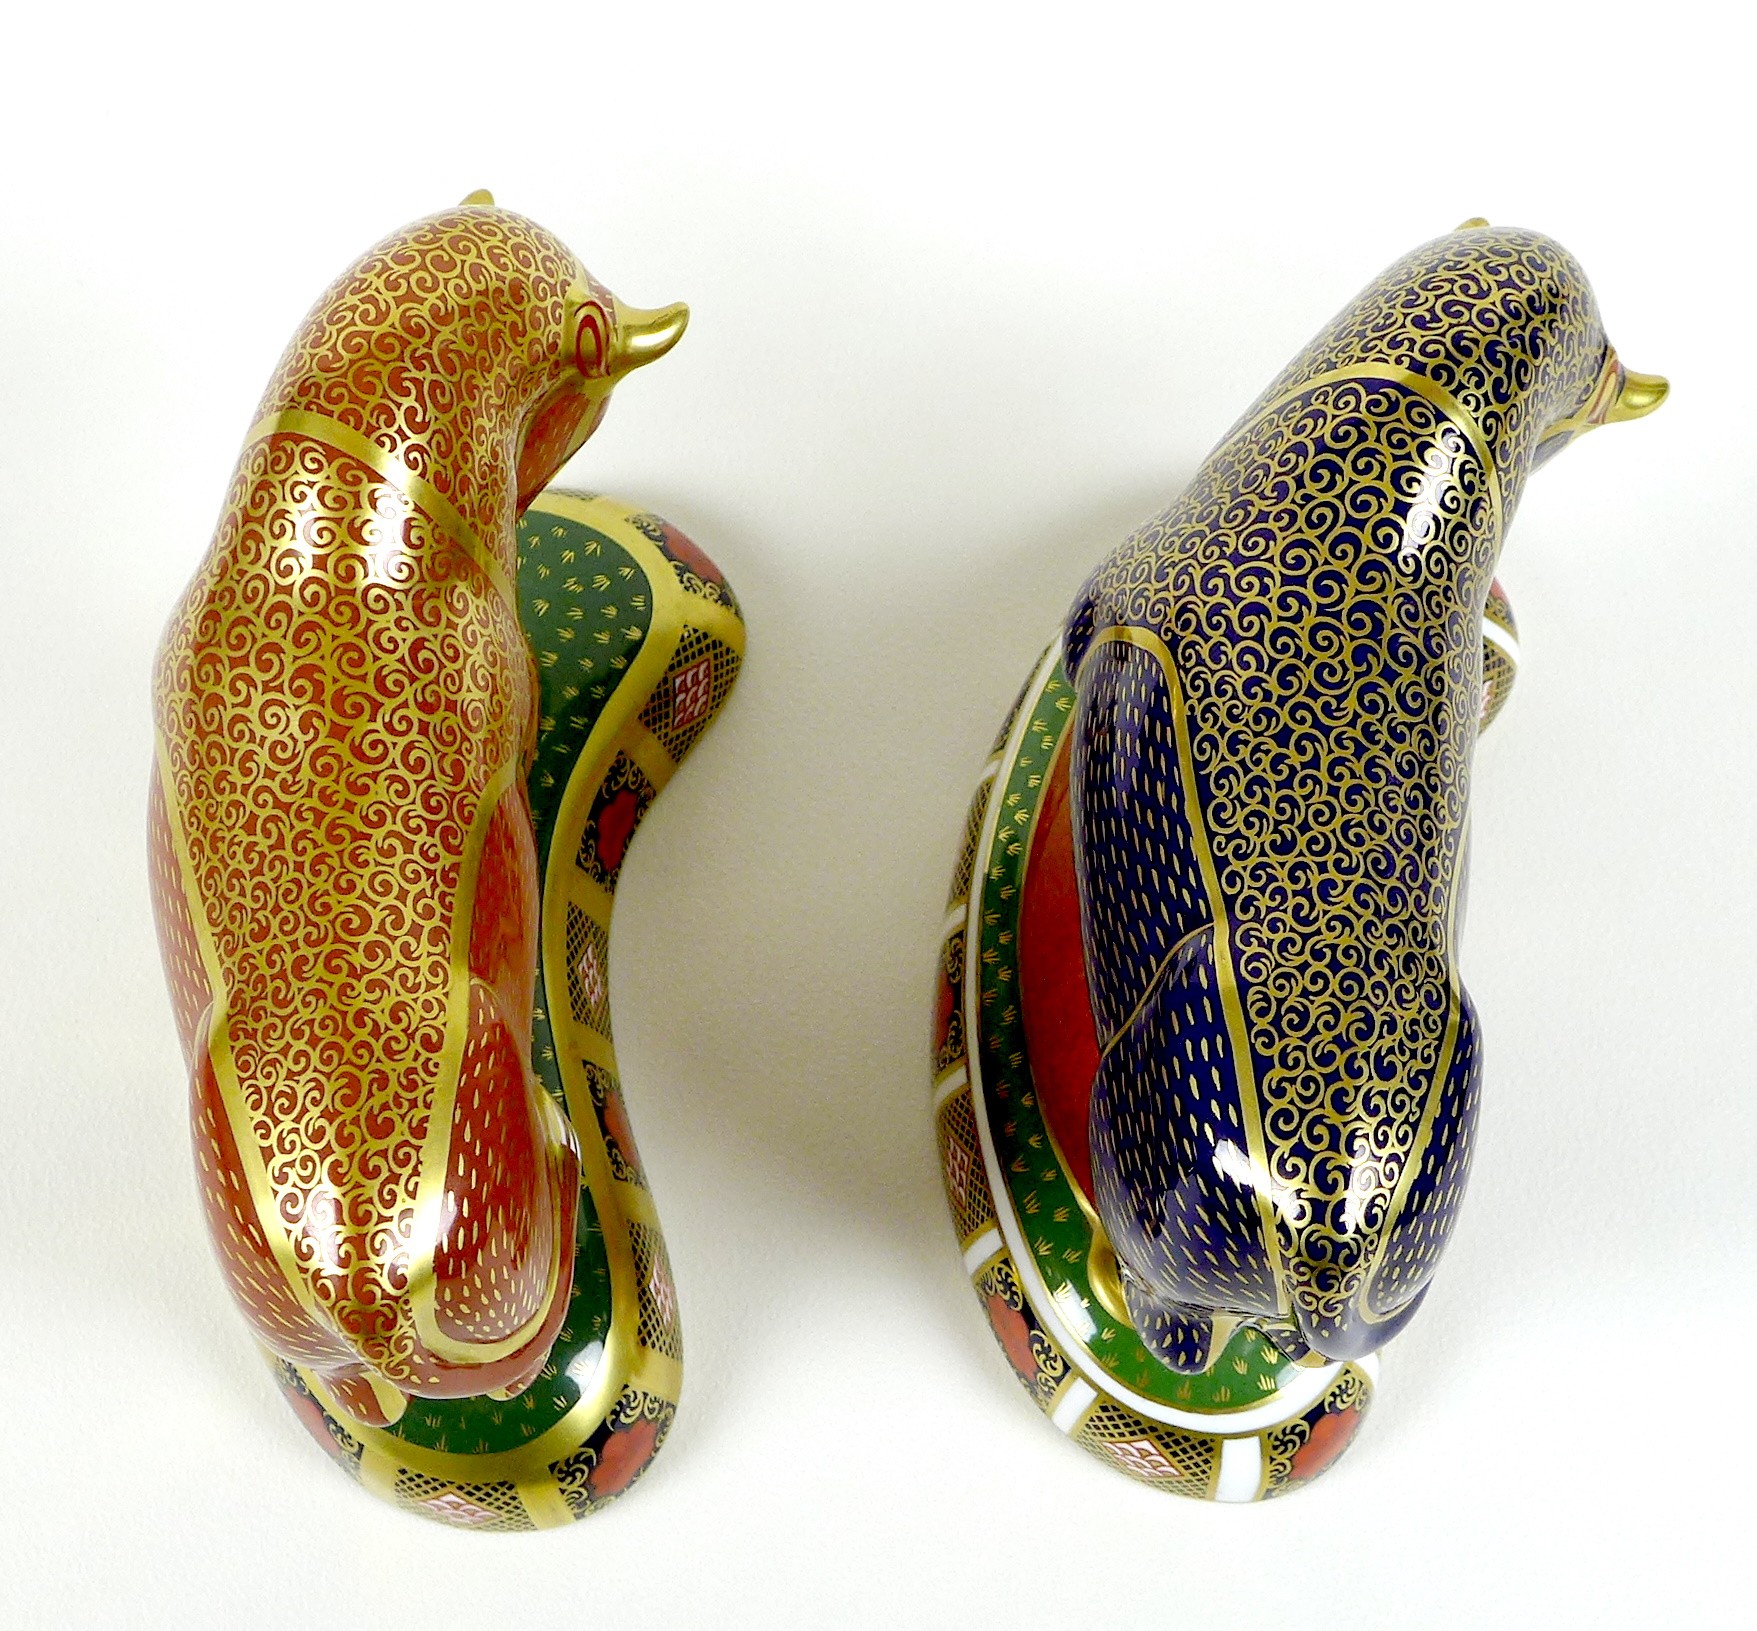 Two Royal Crown Derby paperweights, modelled as 'Harrods Bull', one of a limited edition of 400 - Image 5 of 8